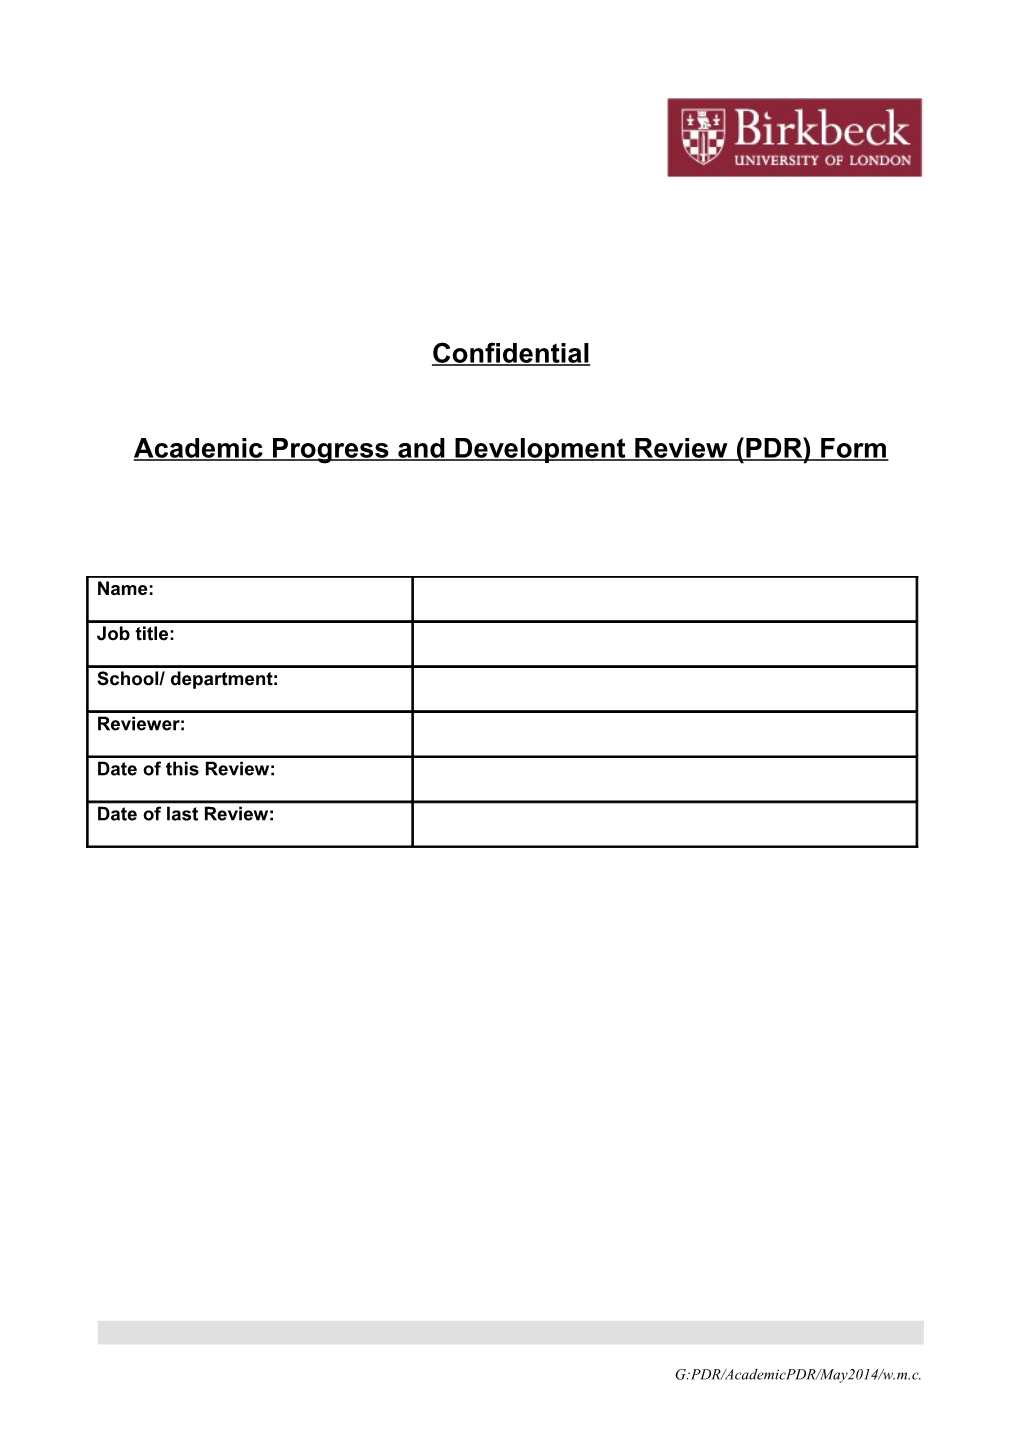 Academic Progress and Development Review (PDR) Form